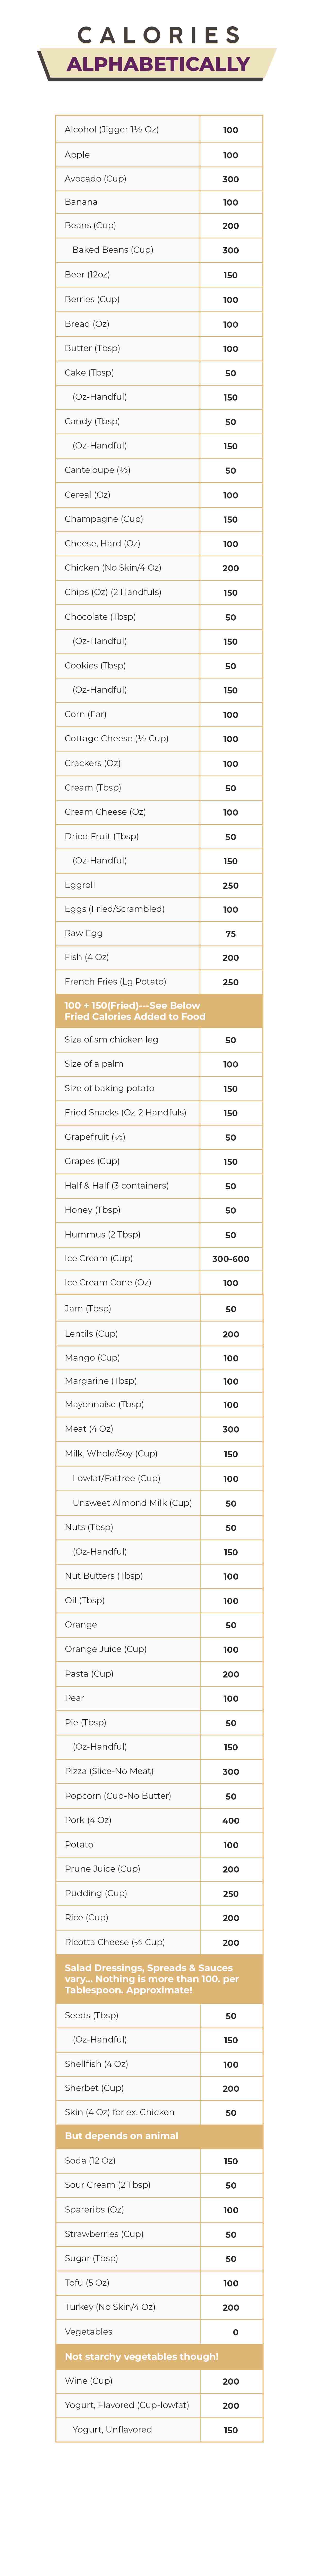 Calories reference chart